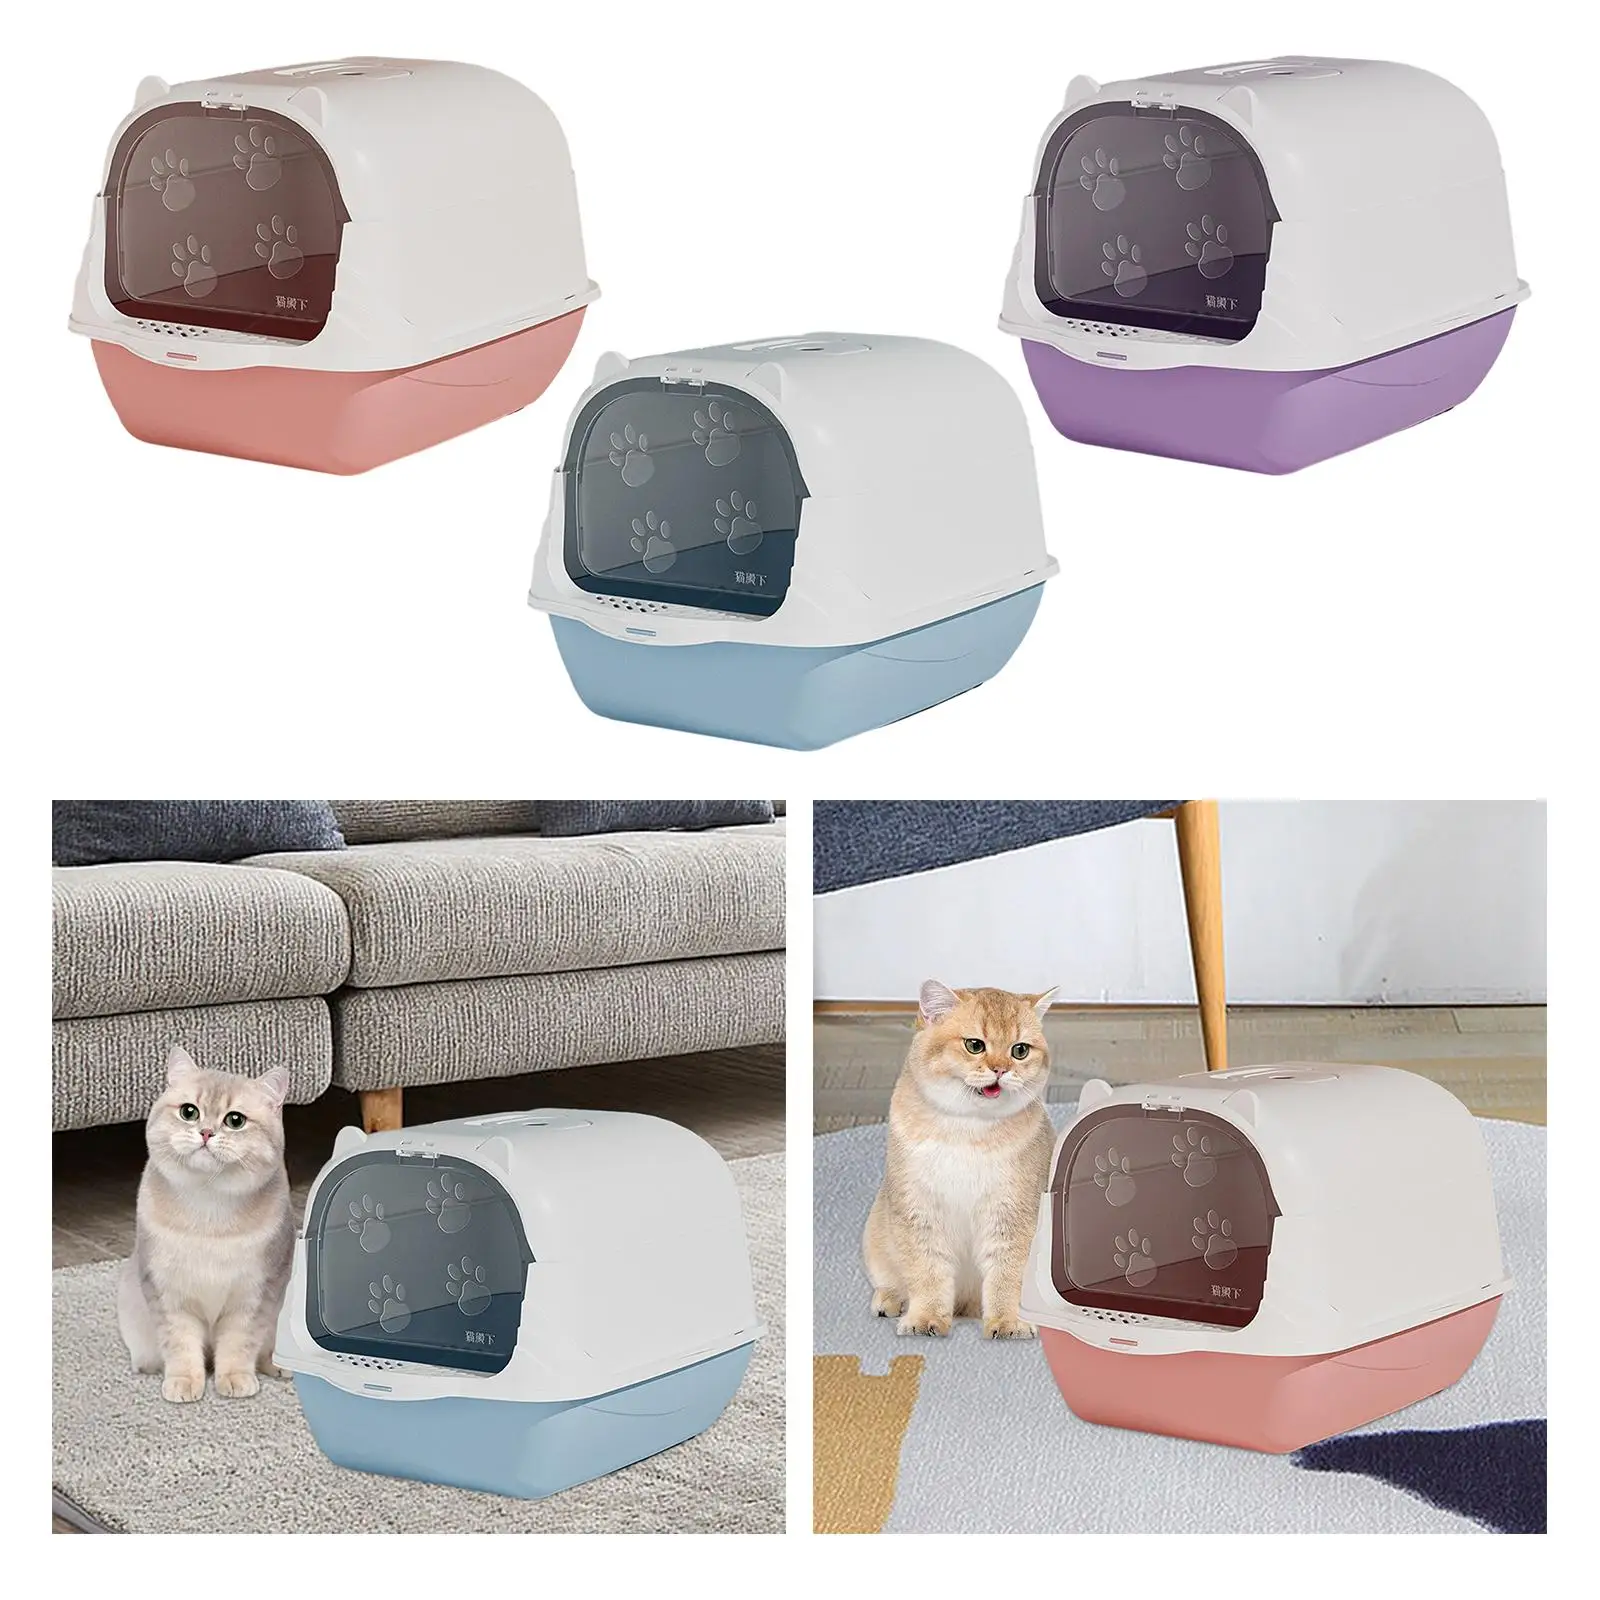 Hooded Cat Litter Box with Lid Enclosed Cat Toilet Hooded Pet Litter Tray with Front Door Durable Pet Litter Box Pet Accessories